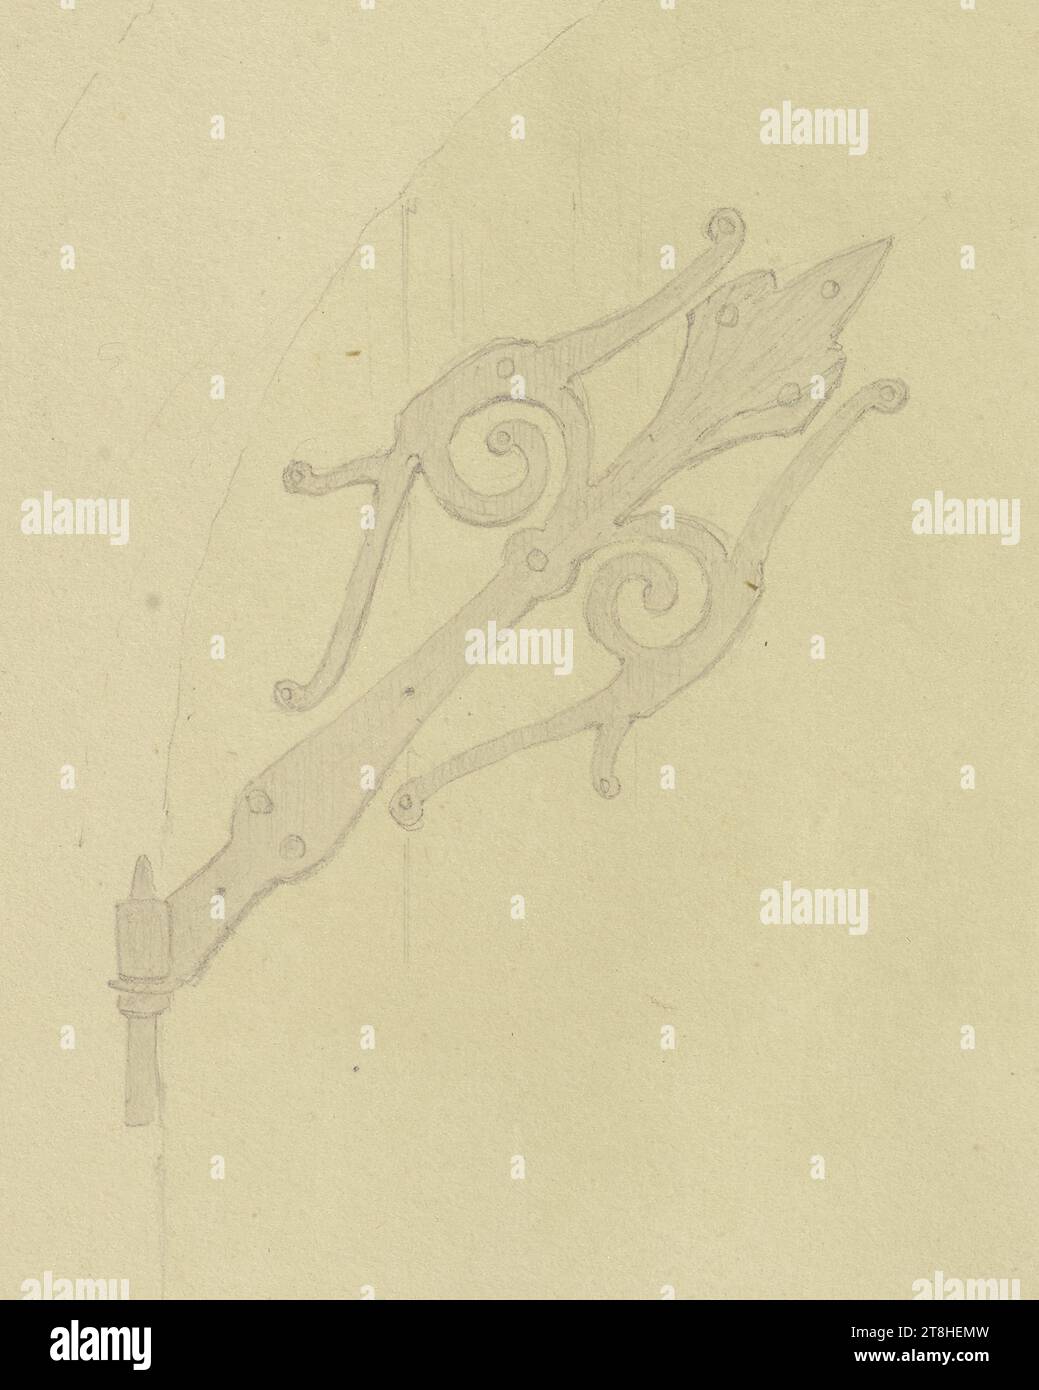 CARL THEODOR REIFFENSTEIN, door hinge in Boppard, July 17, 1885, sheet, 117 x 93 mm, pencil, yellow-brown and blue-gray wash, on paper, door hinge in Boppard, CARL THEODOR REIFFENSTEIN, page, adhesive tapes, volume 40, page 49, part number / overall, 3 / 3, BOPPARD, 19TH CENTURY, DRAWING, pencil, yellow-brown and blue-gray wash, on paper, GRAPHITE-CLAY MIXTURE, INK?, WASH?, PAPER, PENCIL DRAWING, WASH, GERMAN, ARCHITECTURAL STUDY, STUDY AFTER A CRAFT, TRAVEL STUDY, Dated and inscribed lower right, in pencil, Boppard July 17, 1885., Numbered on the page below the drawing, in black pen Stock Photo